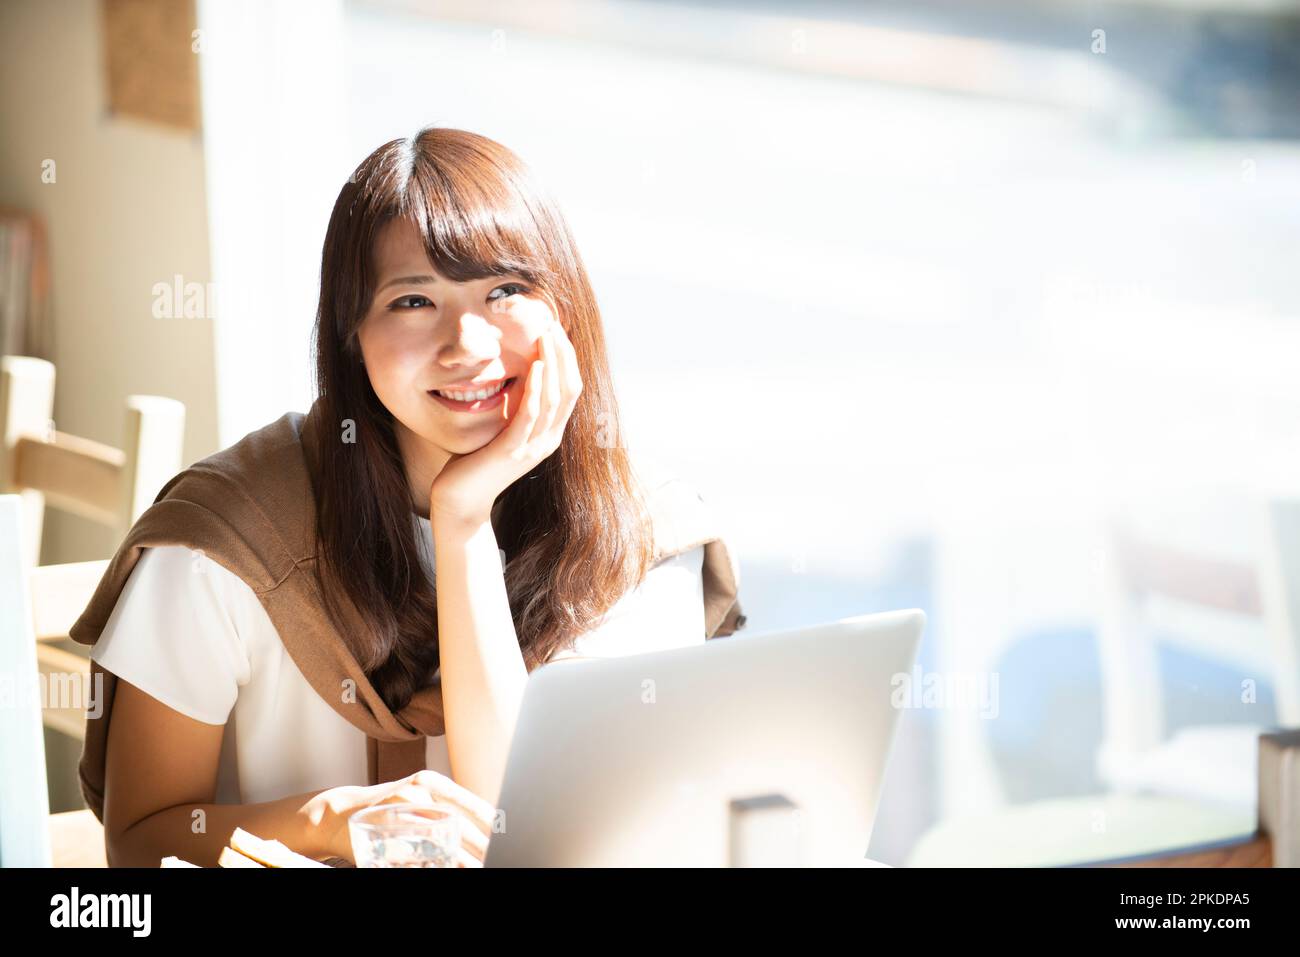 Woman working with a computer at a café Stock Photo